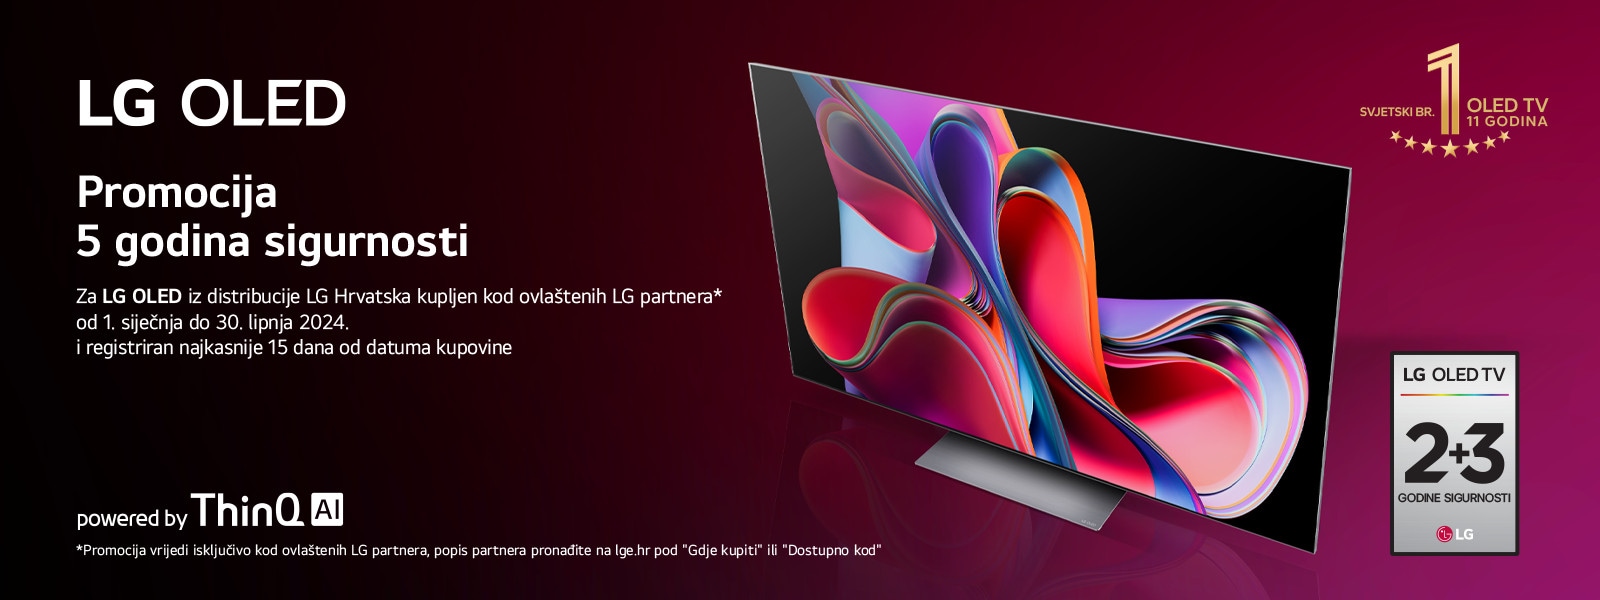 LG-TV-5G-2024-CategoryPage-1600x600